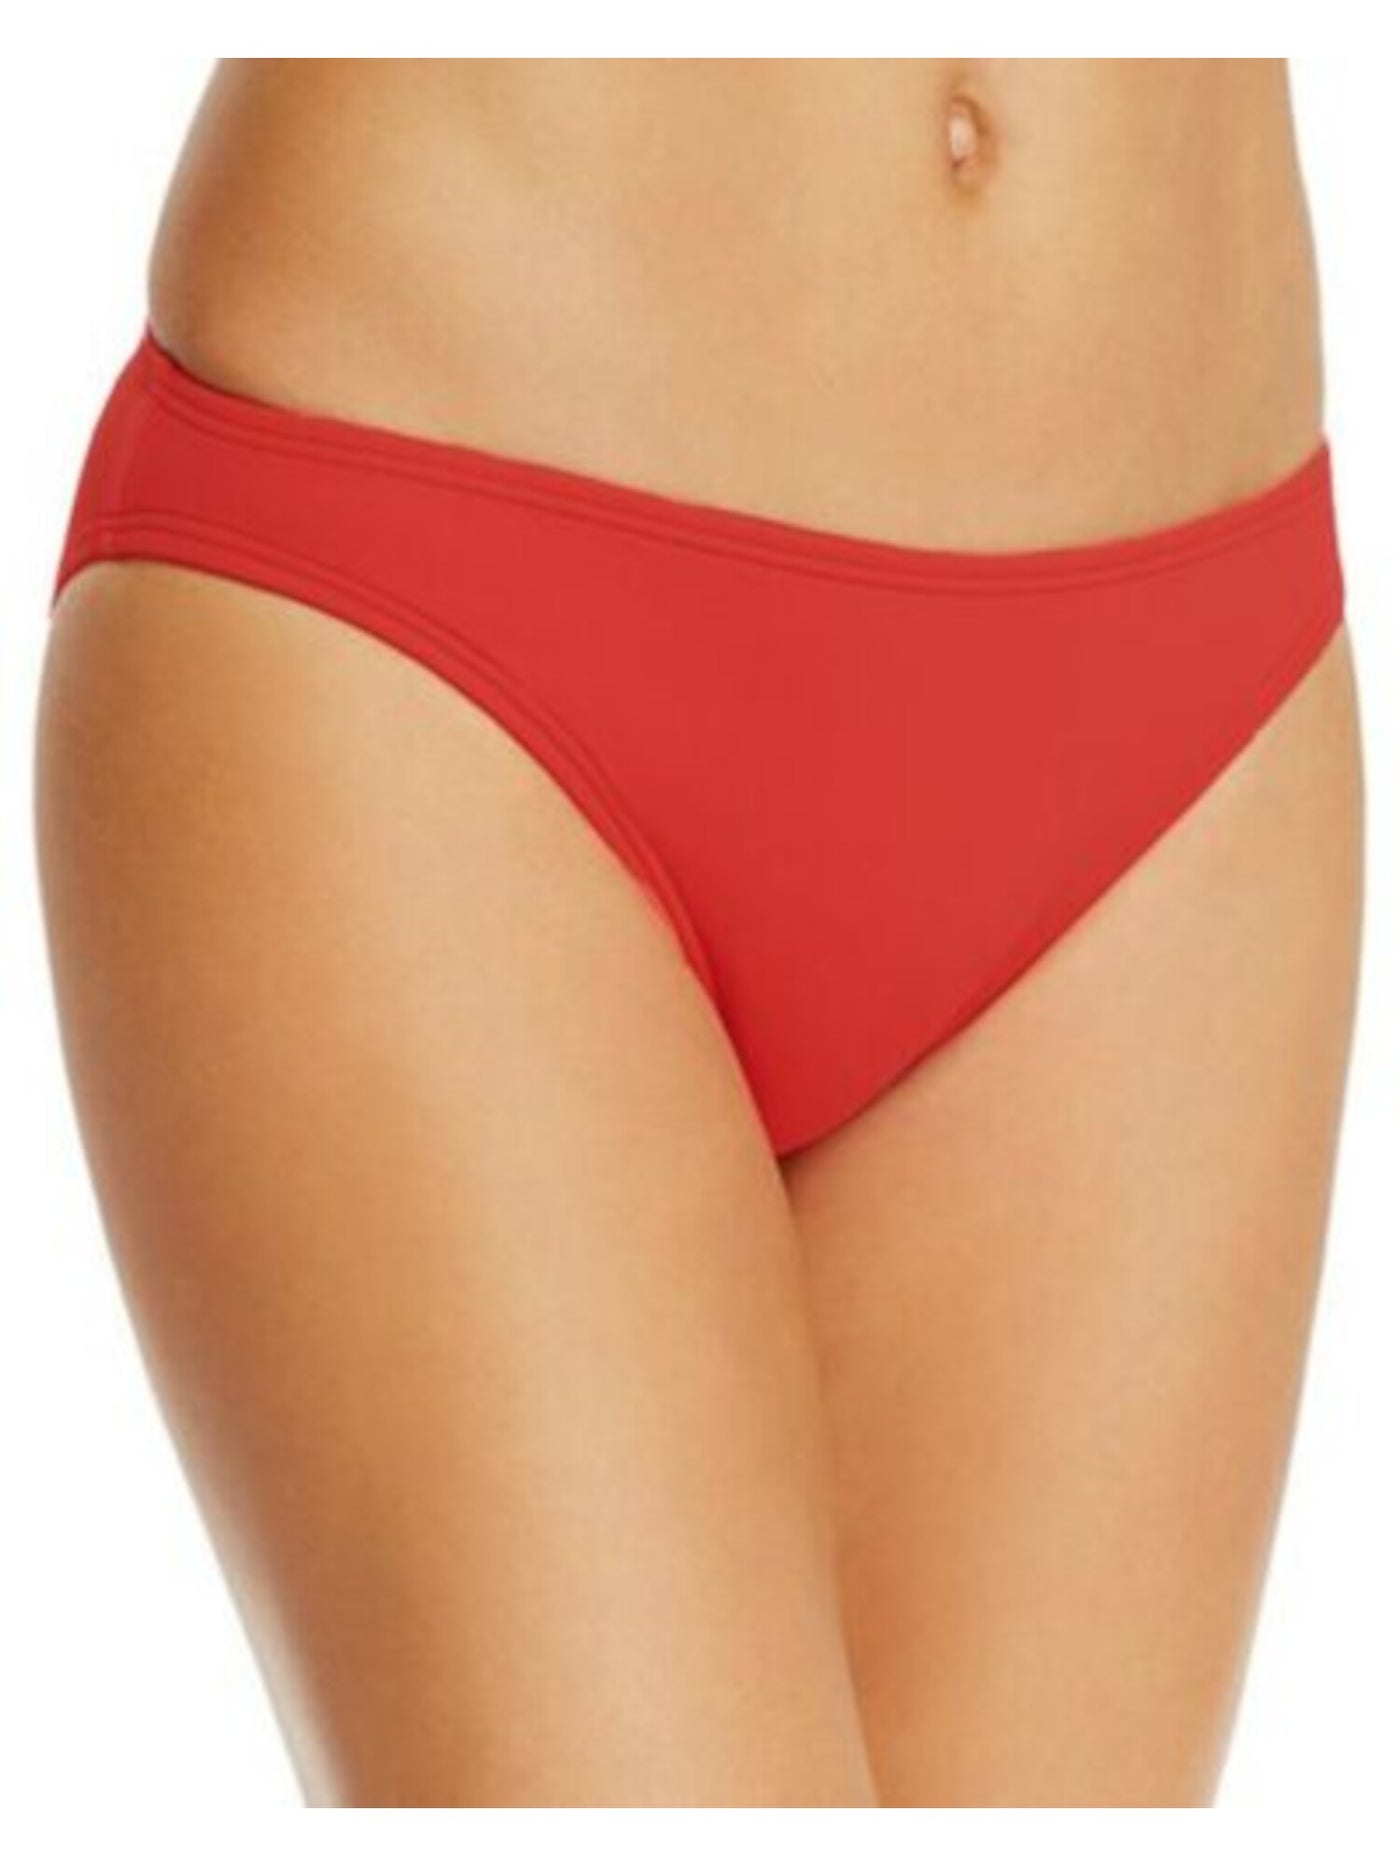 DKNY Women's Red Stretch Lined Bikini Full Coverage UV Protection Hipster Swimsuit Bottom XXL